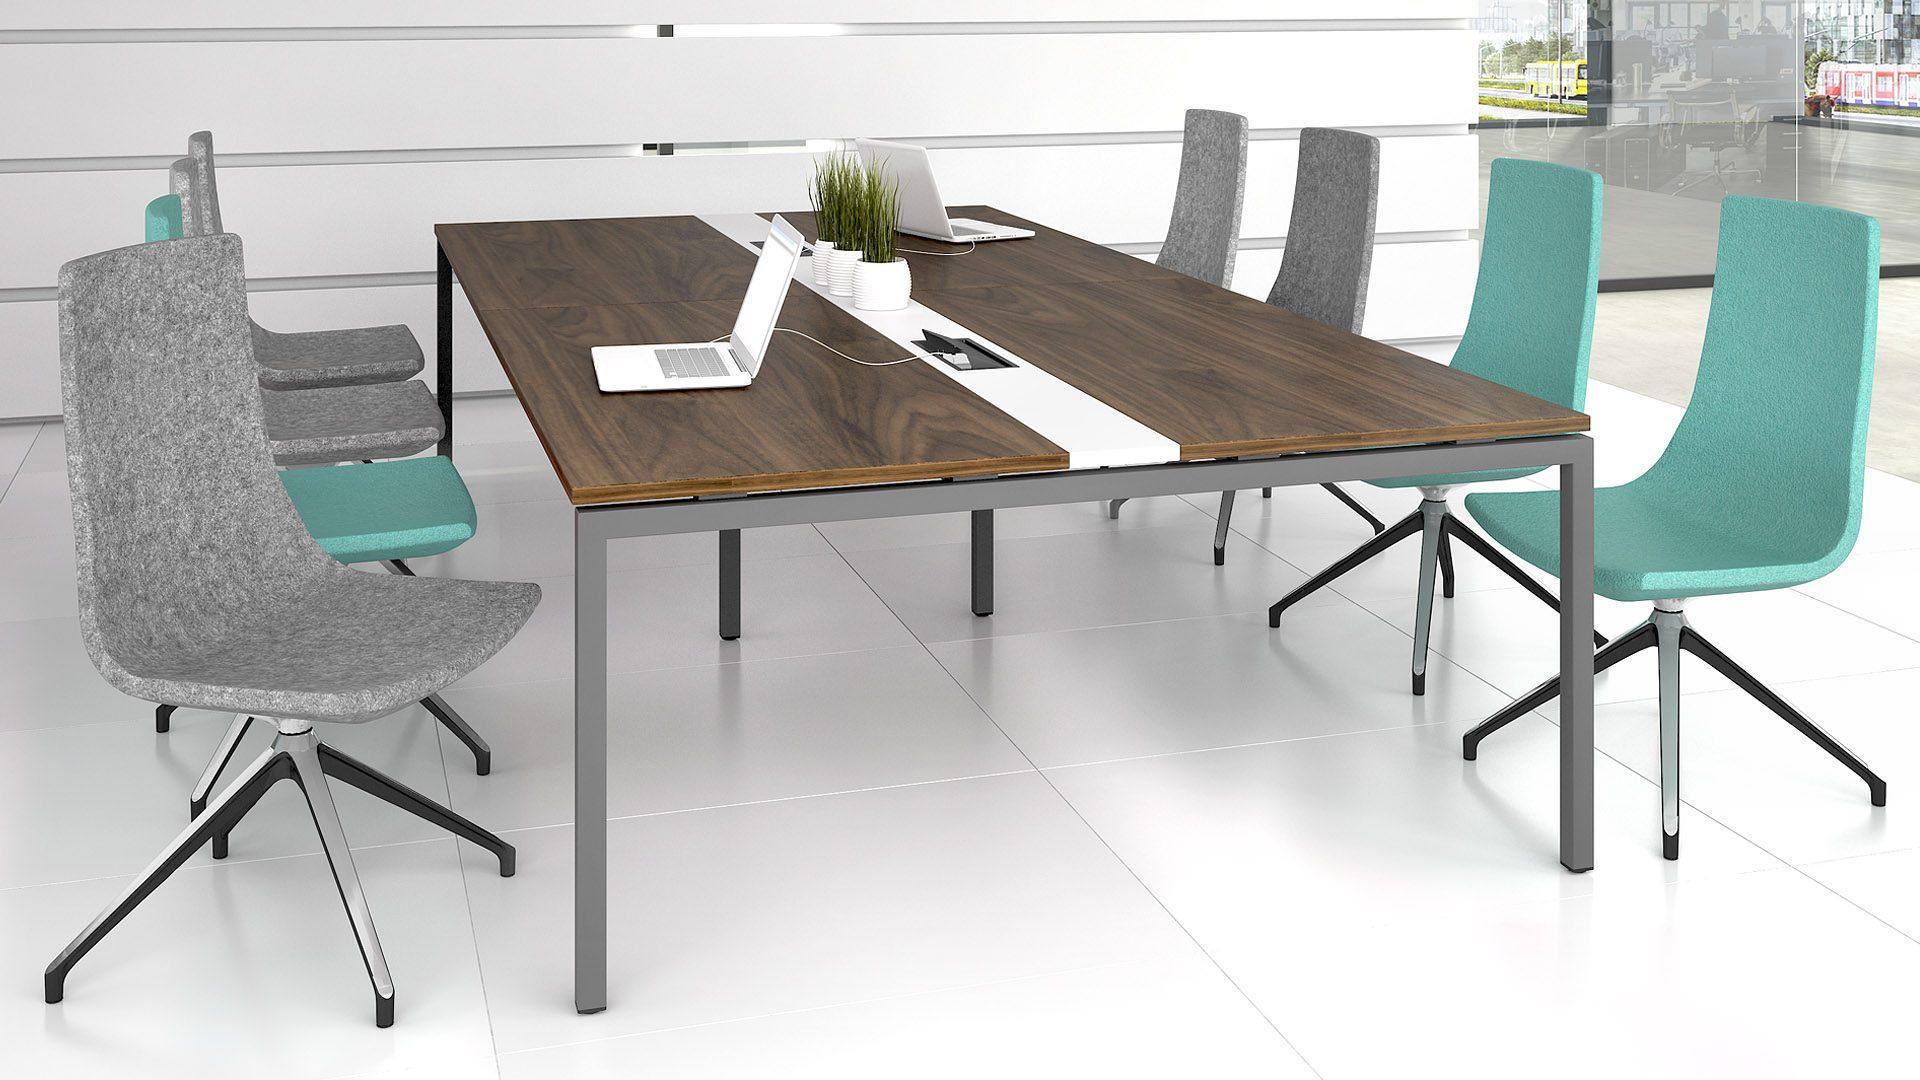 Nova meeting table in dark walnut with North Cape fabric meeting chairs